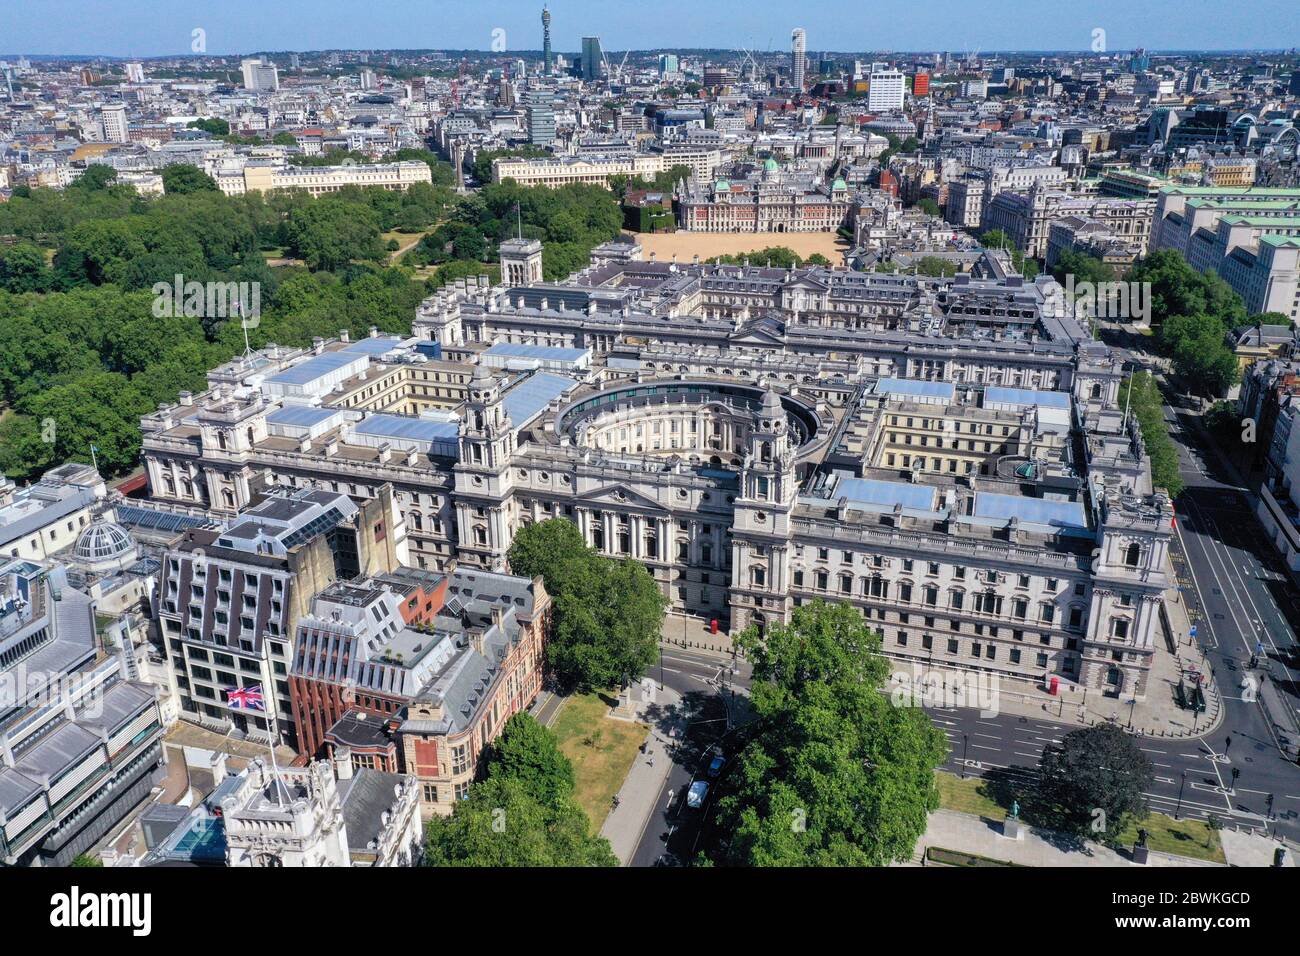 An aerial view of London the junction of Parliament Street and Great George Street, with St James's Park on the left with government buildings which house departments including: The Treasury, the Department for Digital, Culture, Media and Sport, HMRC, the Foreign and Commonwealth Office, Downing Street, the Cabinet Office and Horseguards Parade, and (right) the Ministry of Defence, the Old War Office Building and the Department for International Trade. Stock Photo